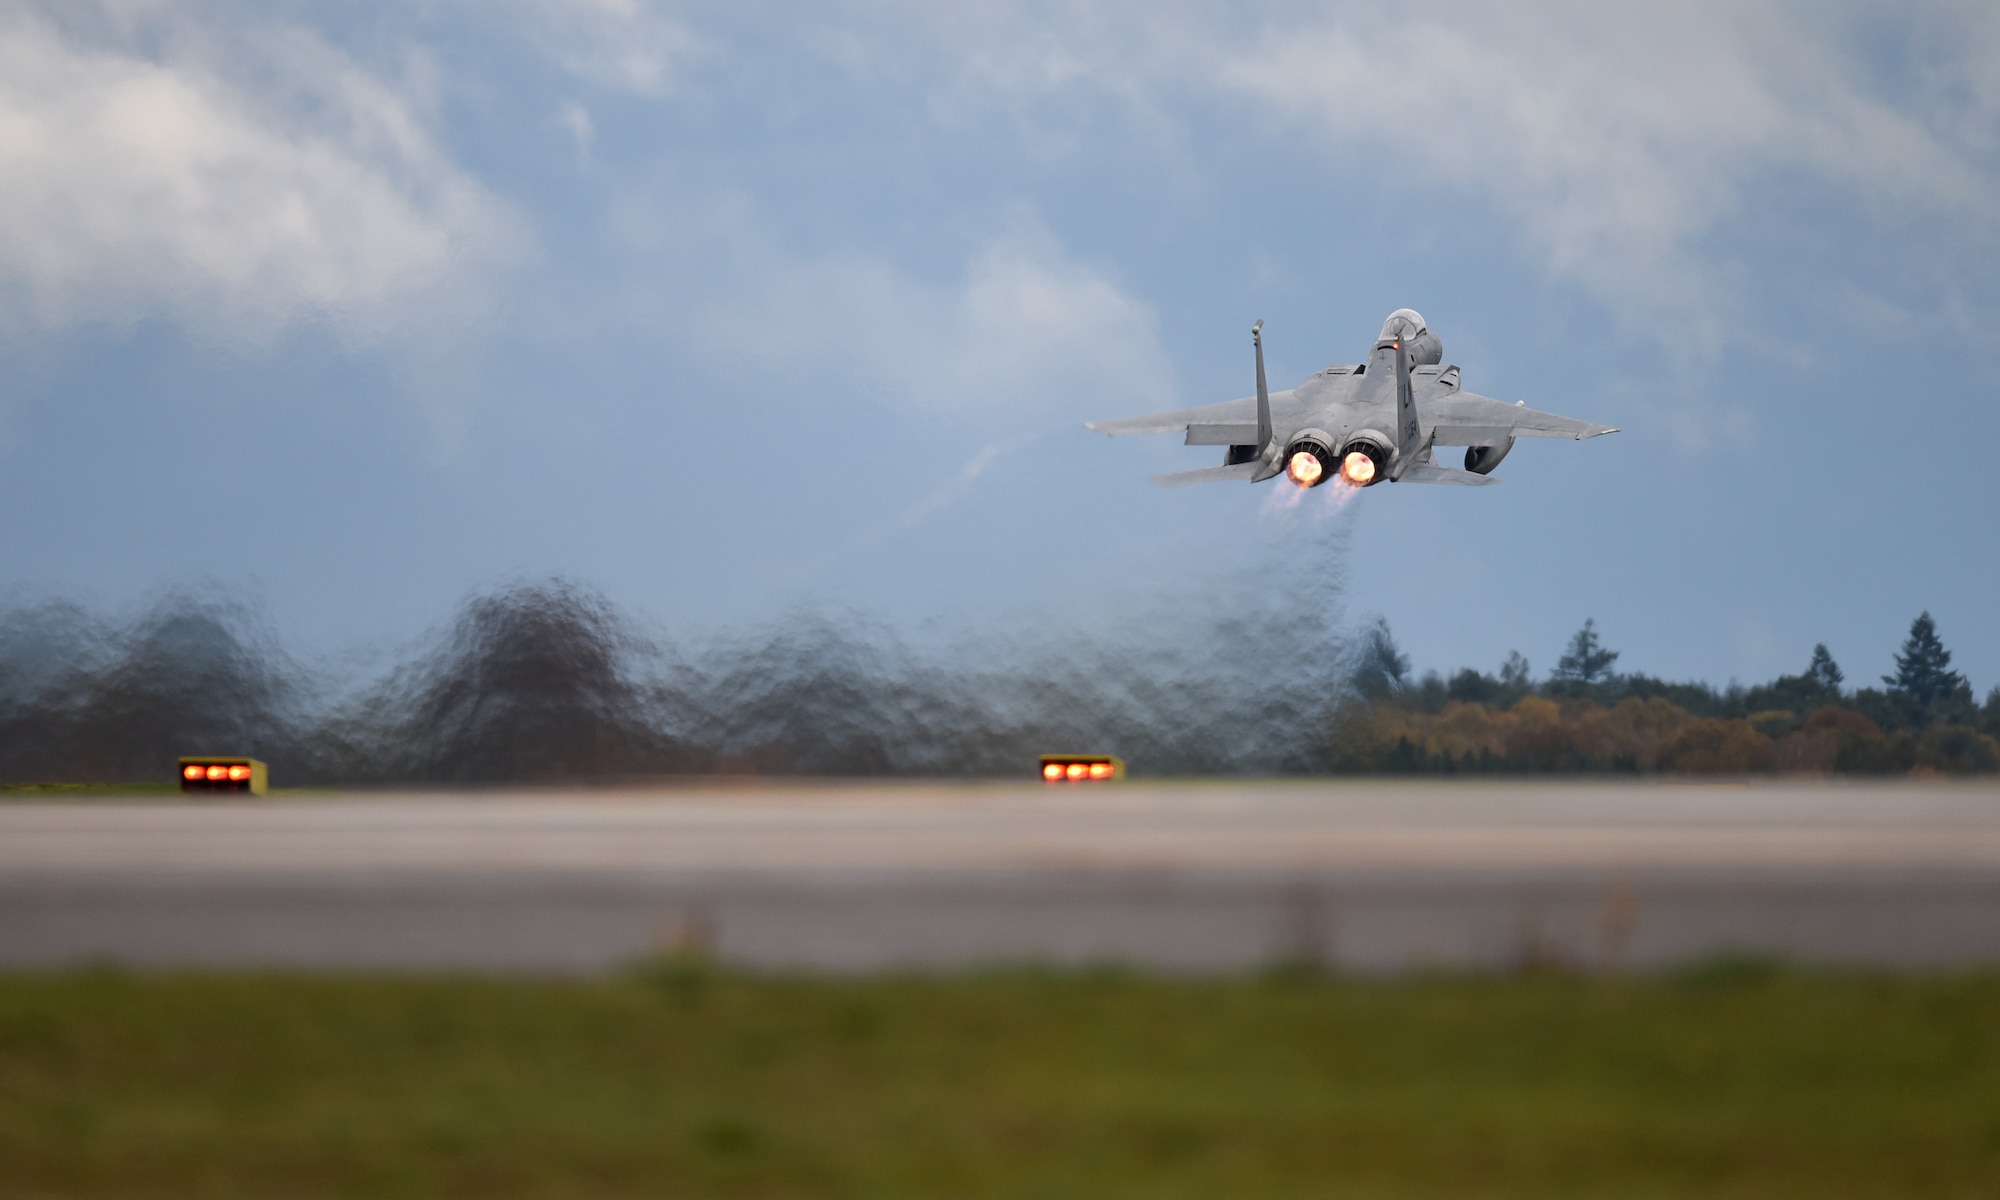 An F-15C Eagle assigned to the 493rd Fighter Squadron takes off in support of exercise Point Blank 19-8 at Royal Air Force Lakenheath, England, Nov. 14, 2019. The purpose of Point Blank is to exercise large force capabilities that incorporate current and future wartime scenarios. (U.S. Air Force photo by Airman 1st Class Madeline Herzog)